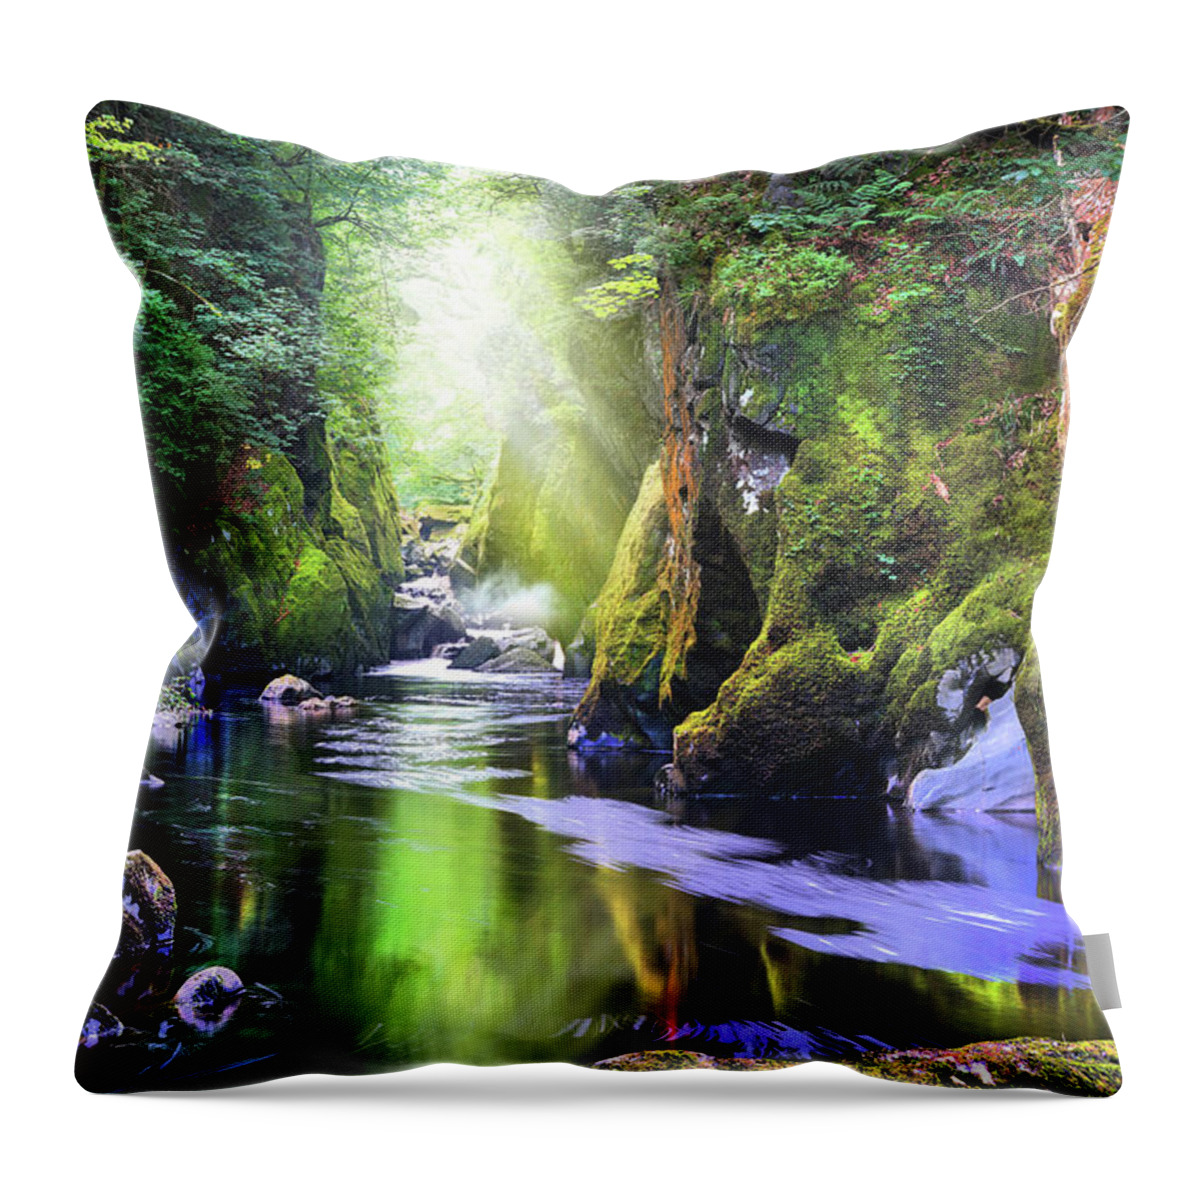 Gorge Throw Pillow featuring the photograph The Fairy Glen Gorge River Conwy by Mal Bray